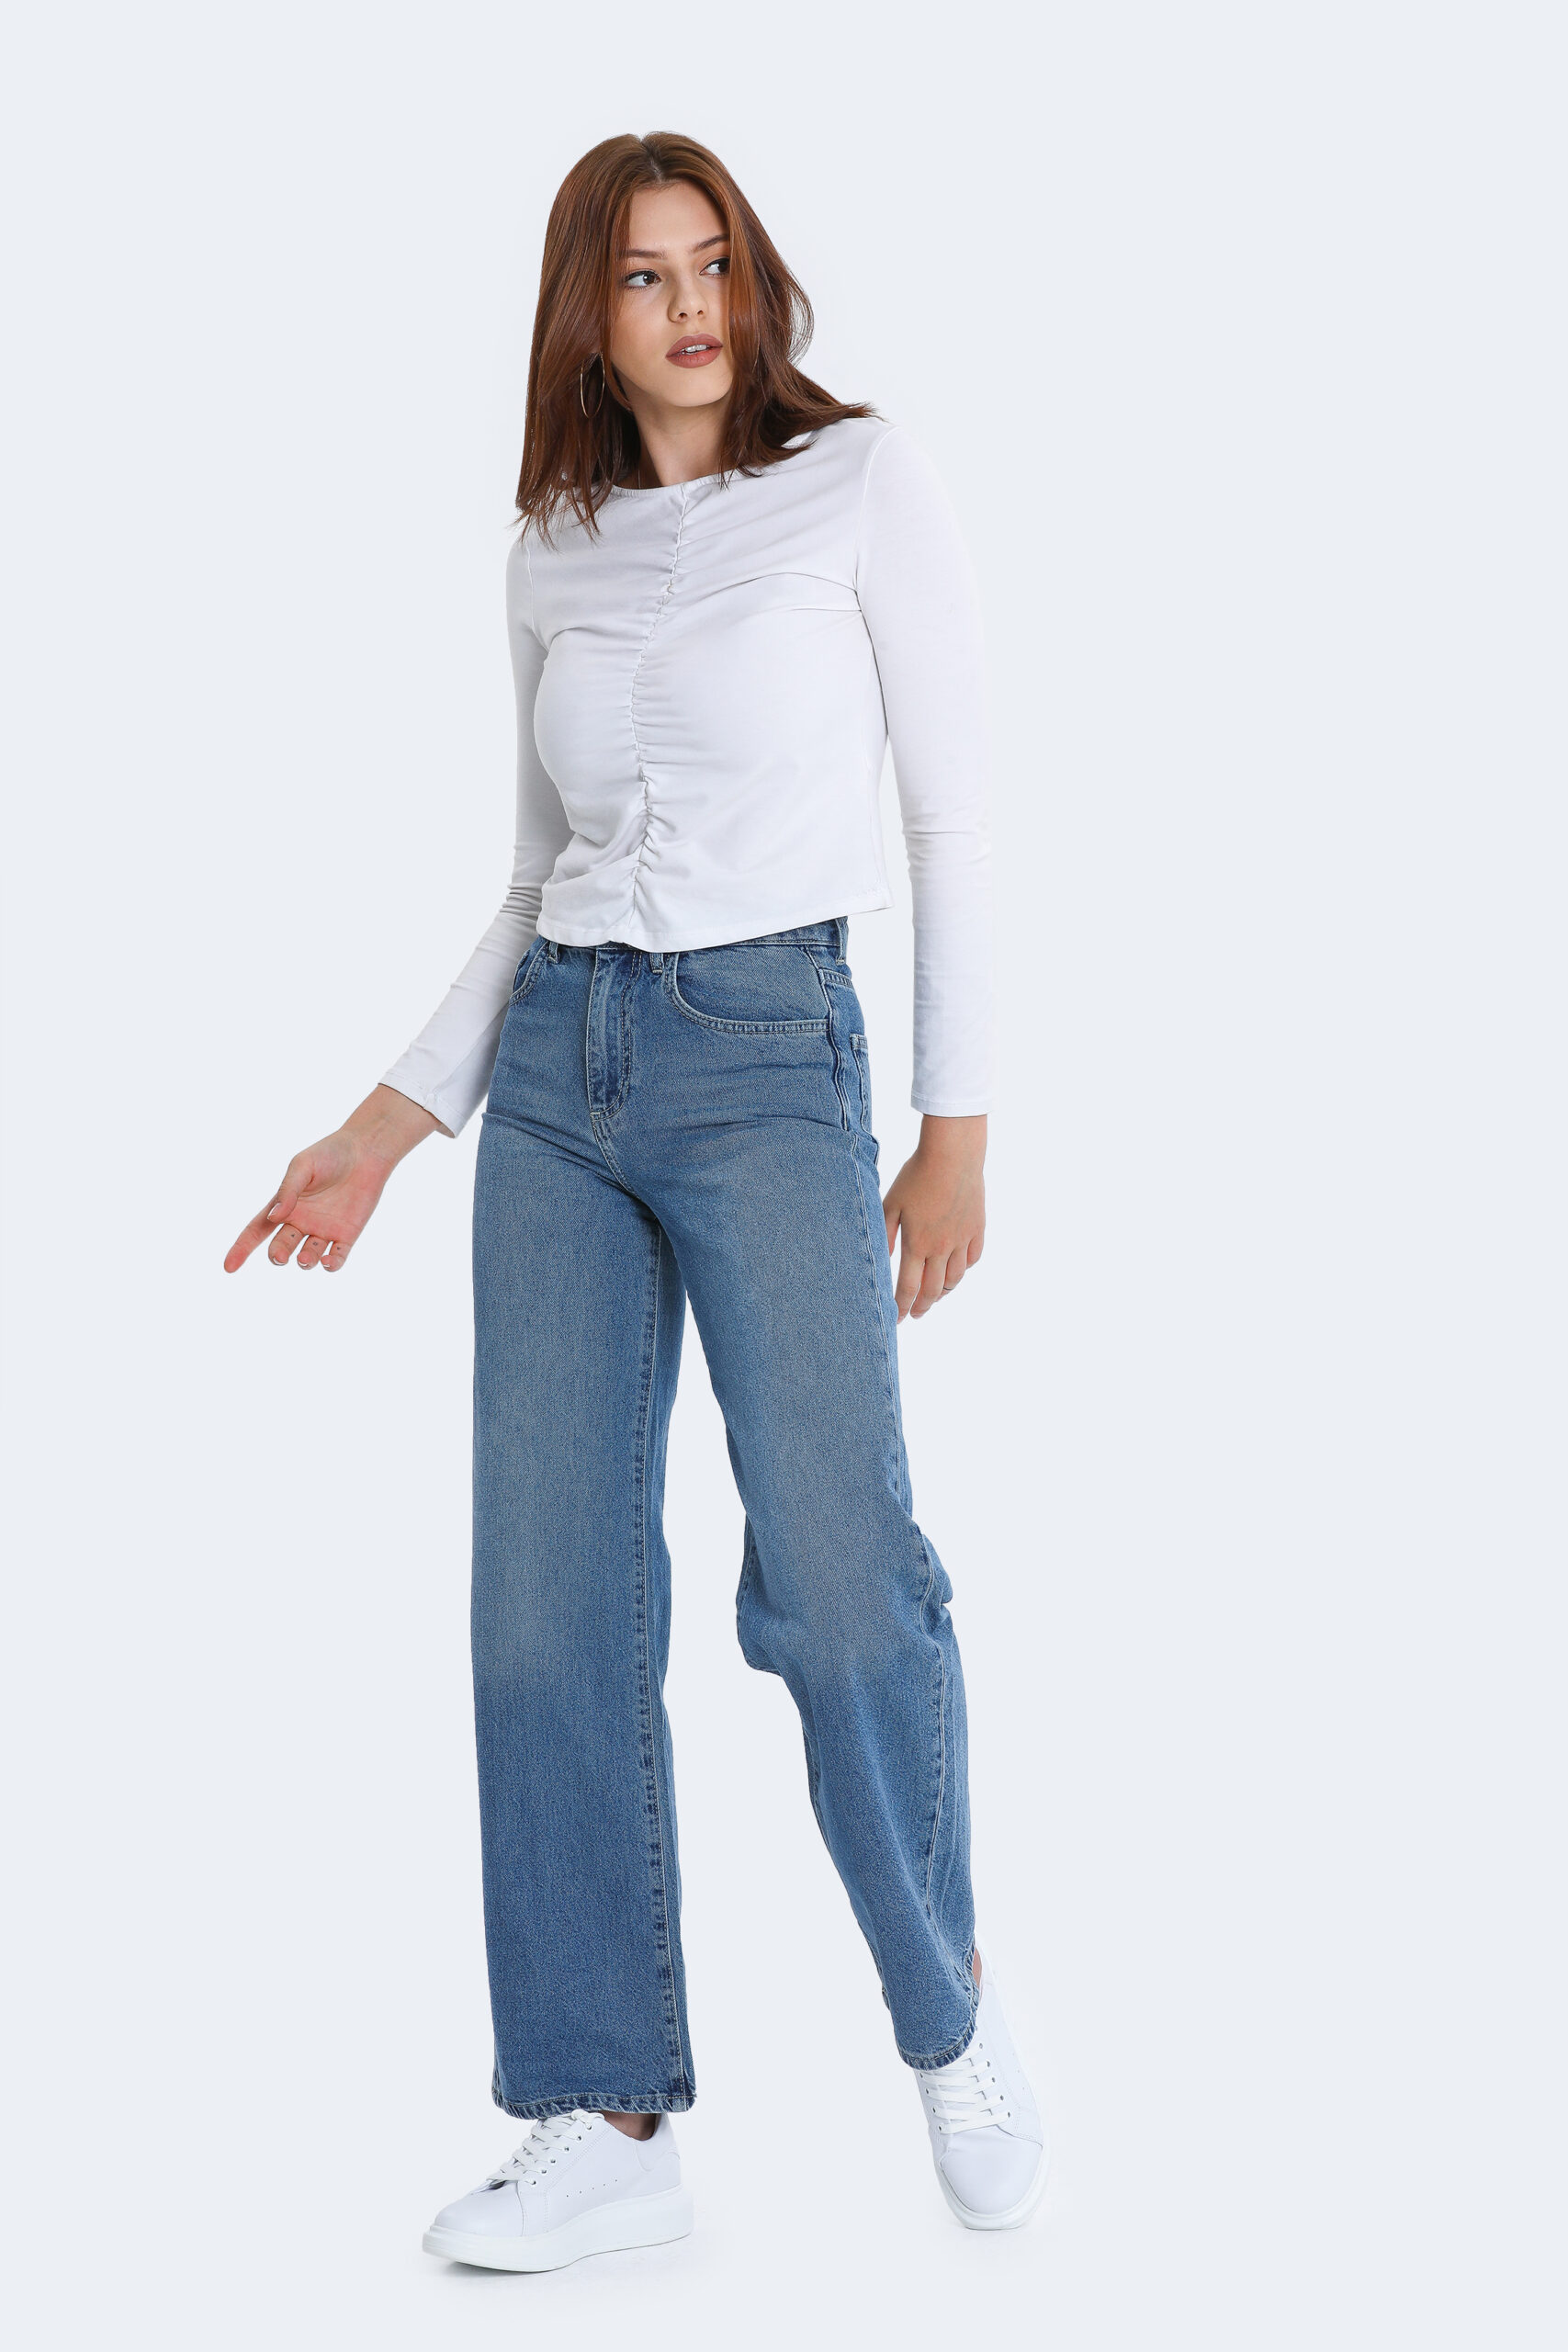 Light Blue Jeans for Hourglass Shape: How to Find the Perfect Fit